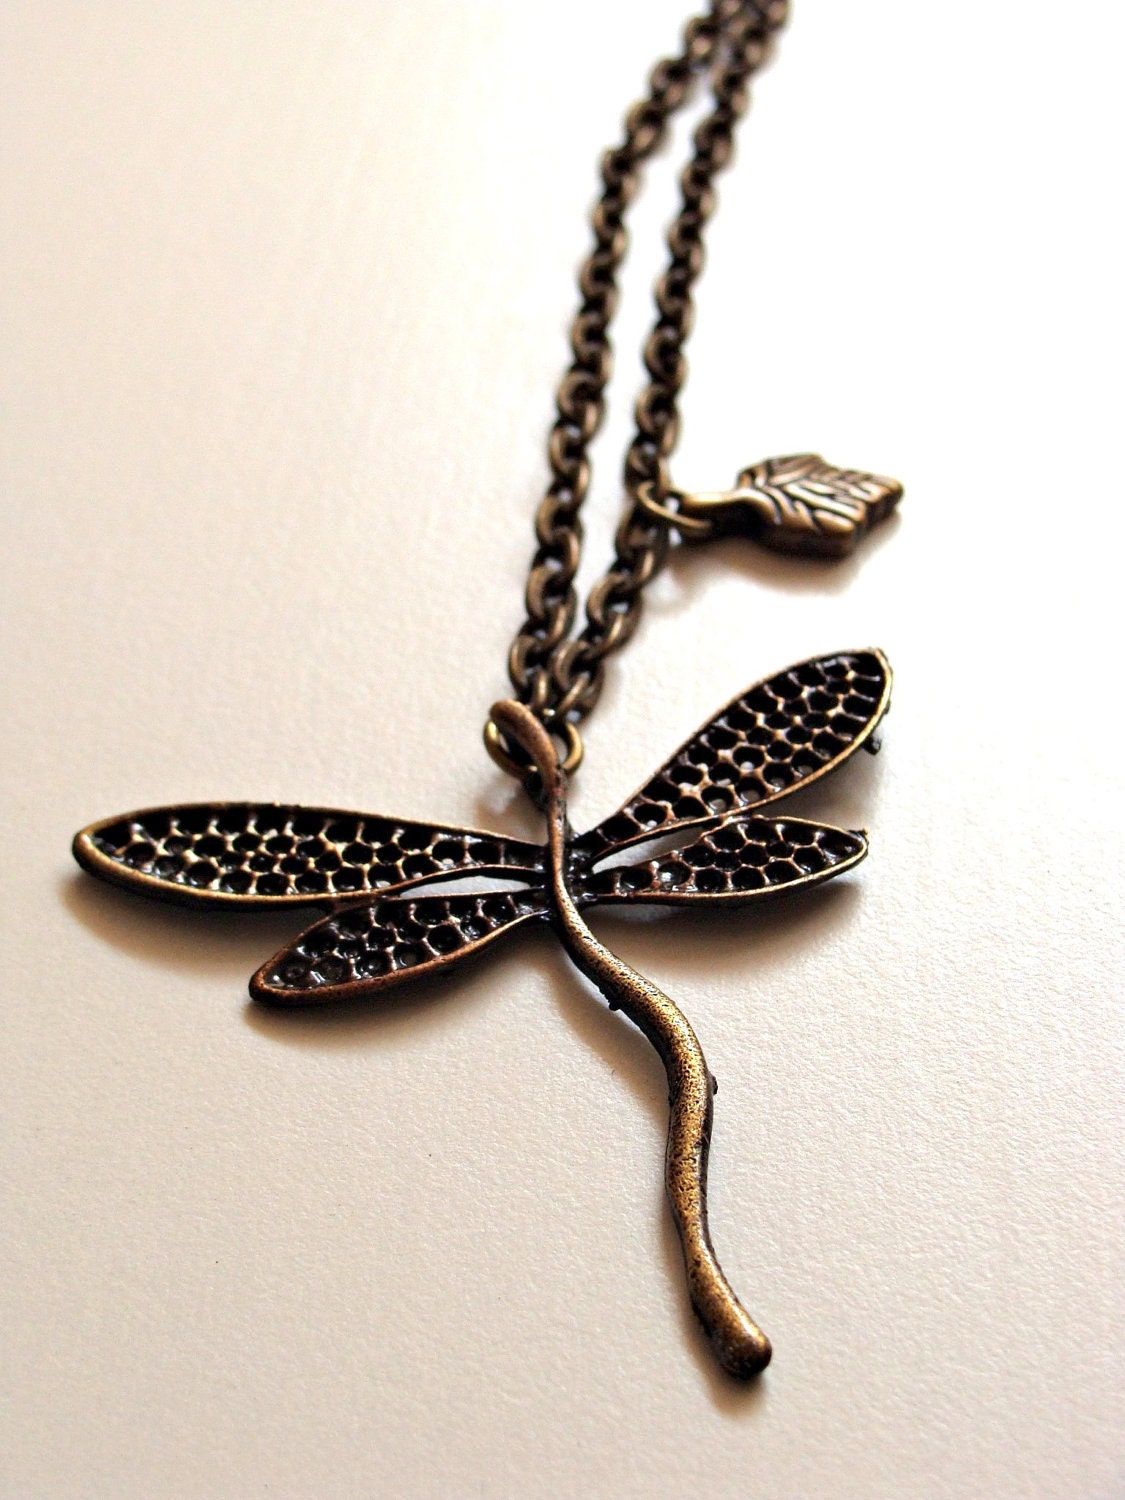 Dragonfly Necklace, Pendant - aged bronze pendant